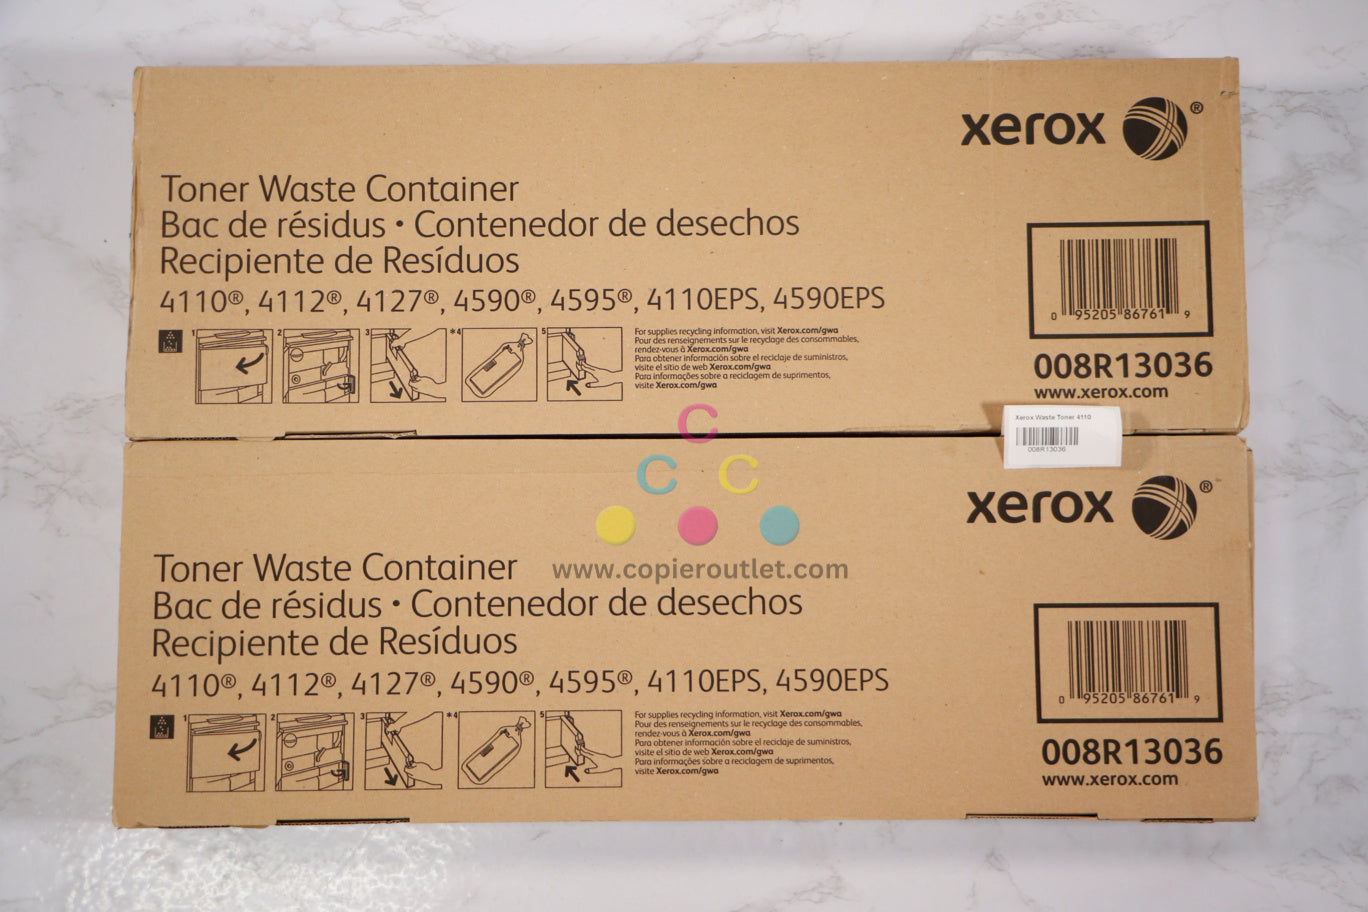 2 New OEM Xerox 4110, 4127, 4590, 4595, D110, D125 Waste Toner Containers 008R13036